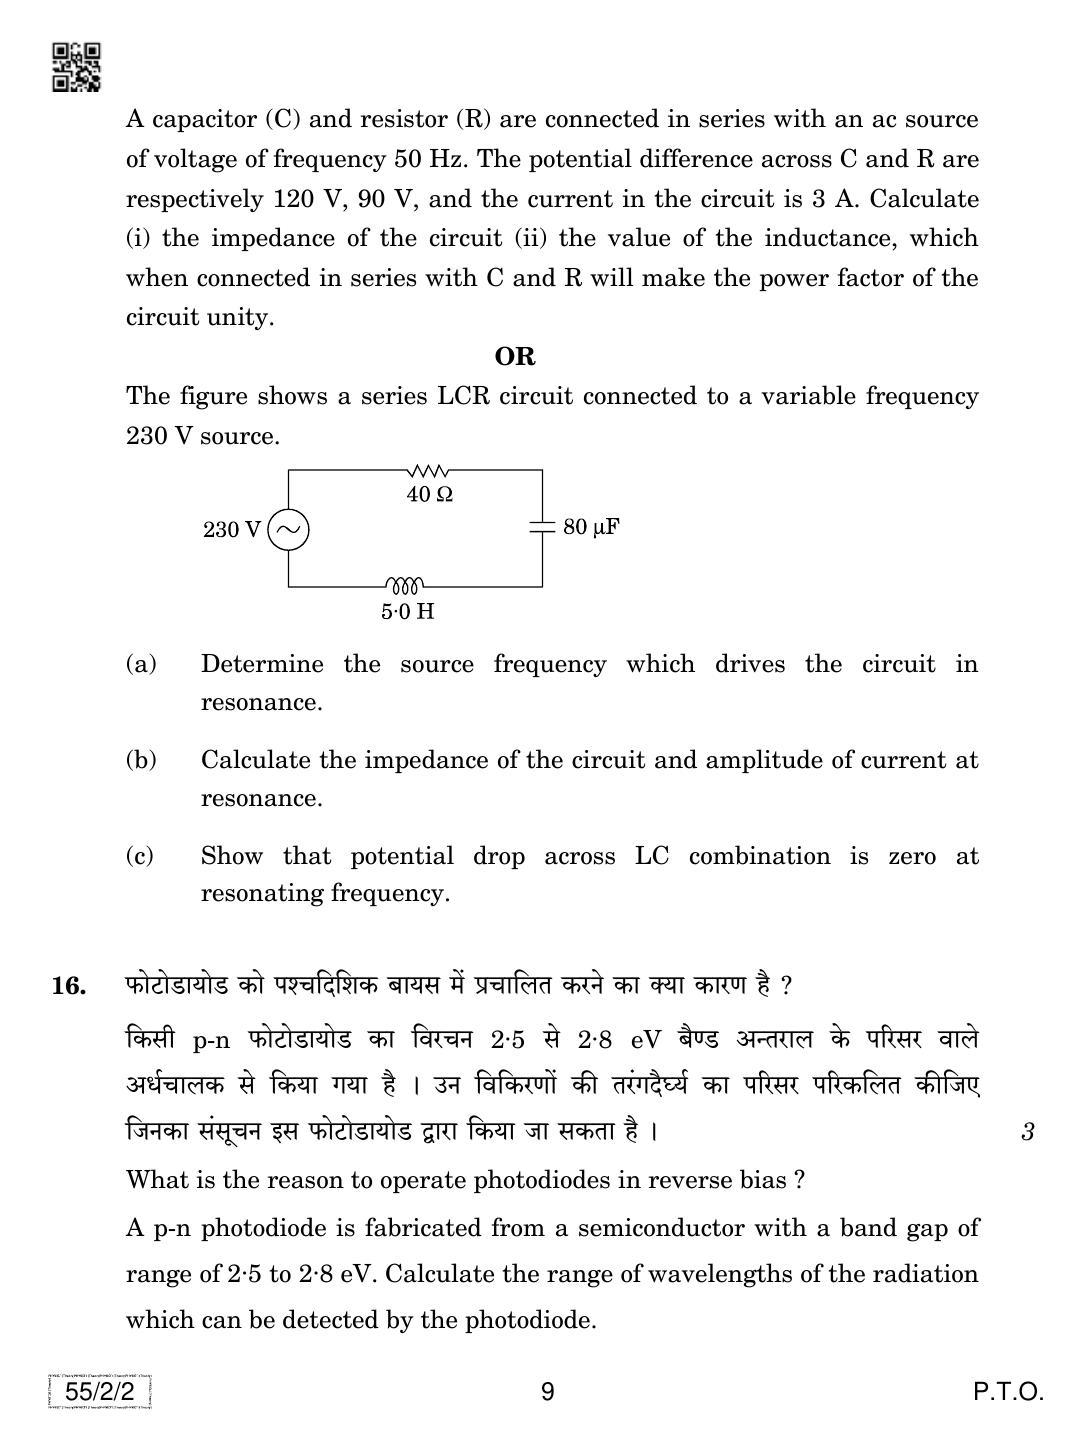 CBSE Class 12 55-2-2 Physics 2019 Question Paper - Page 9